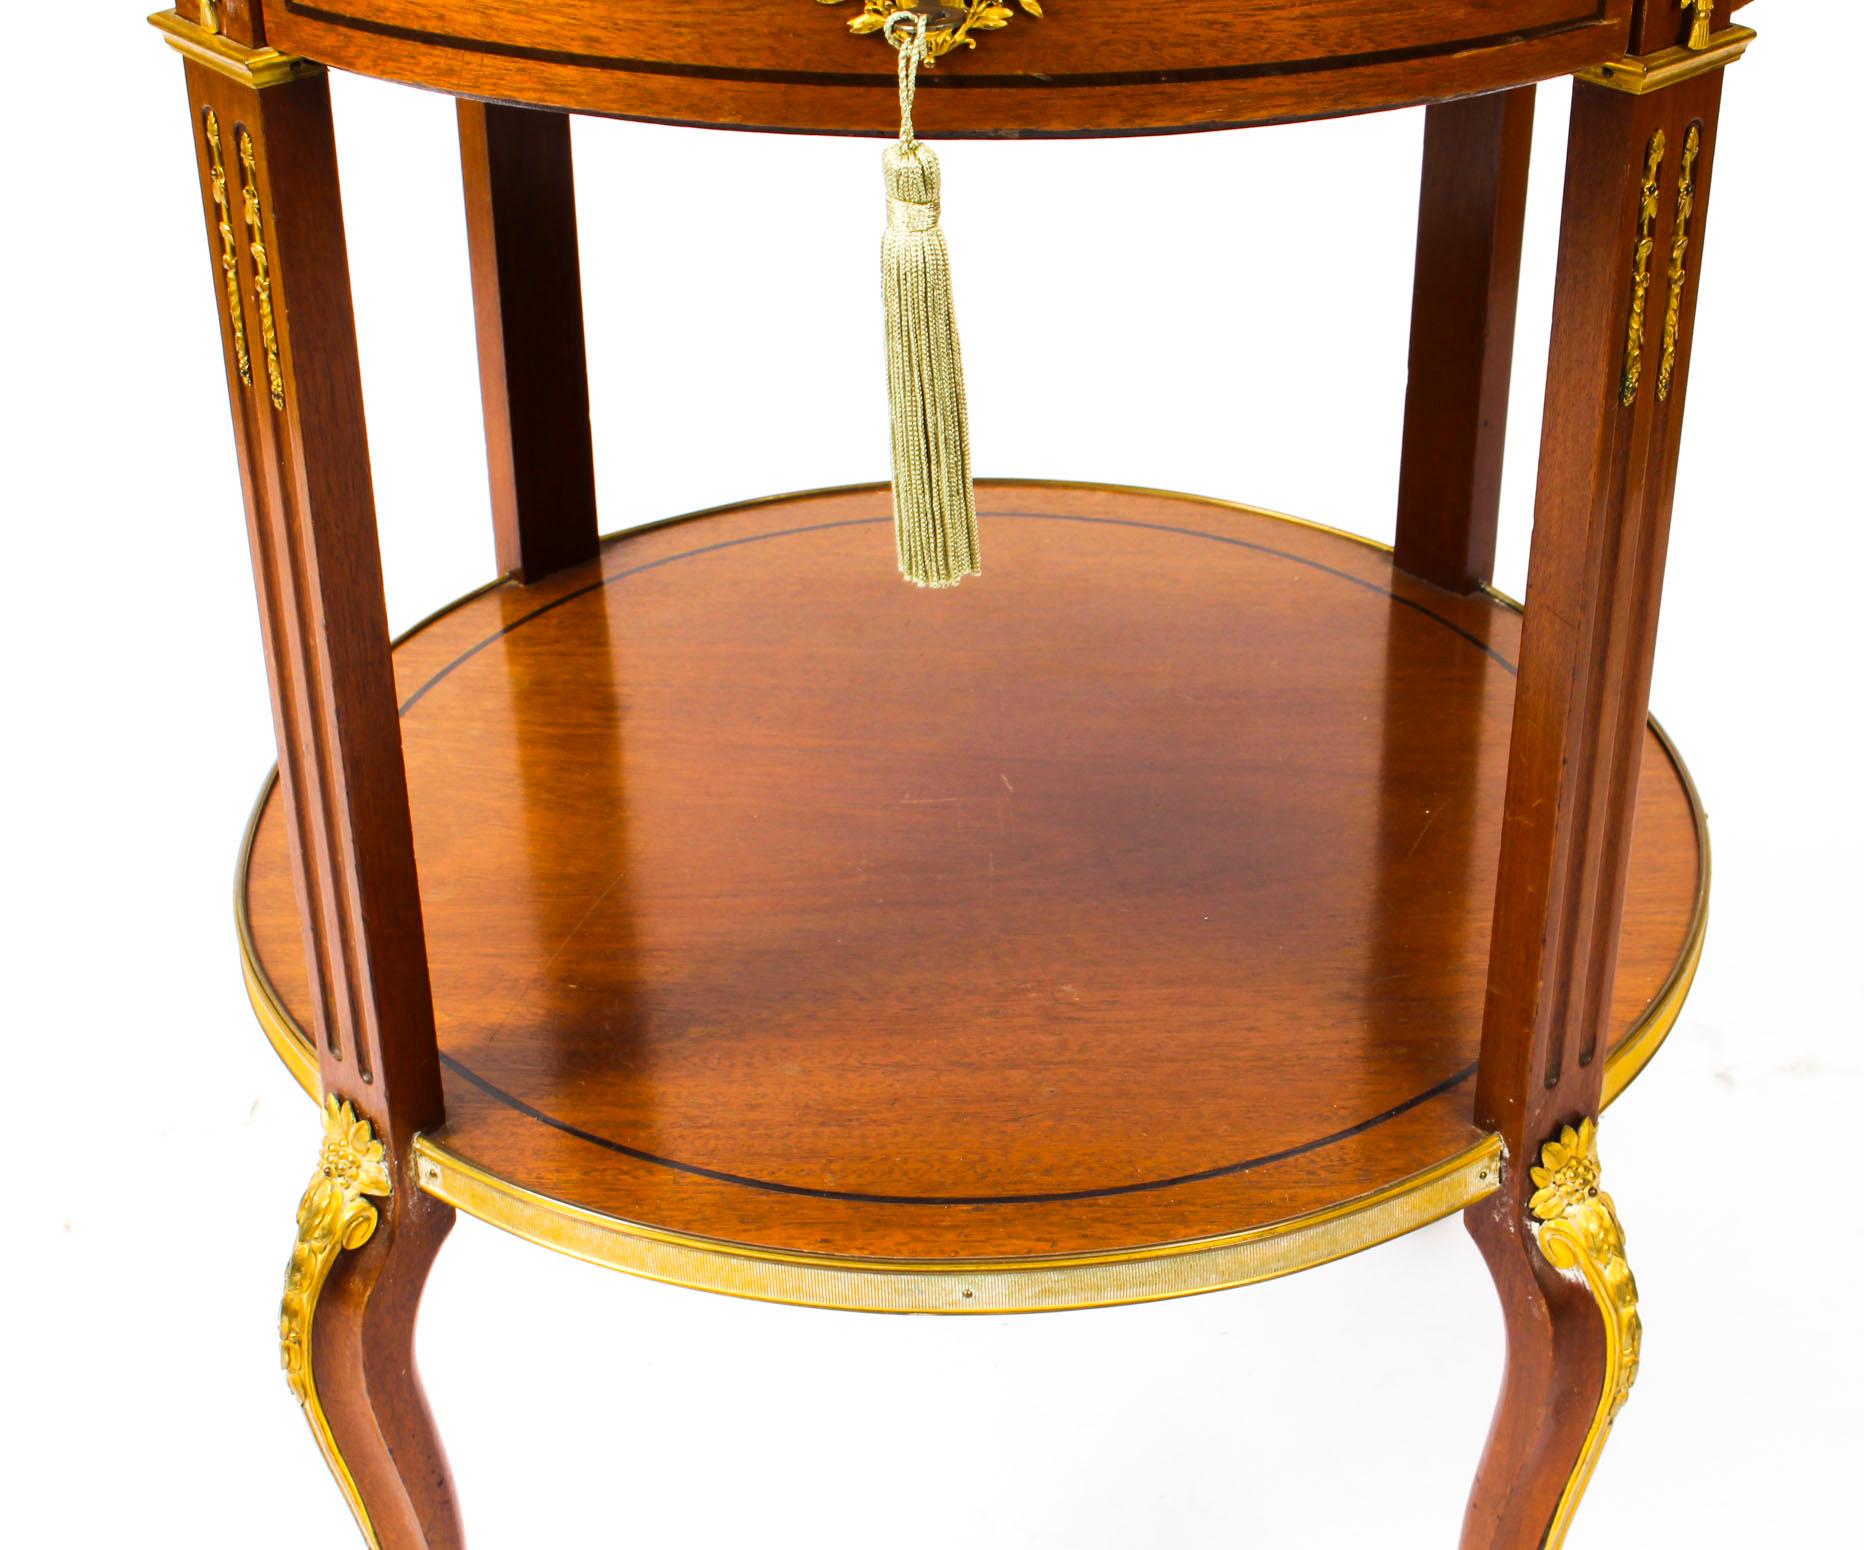 Antique French Louis Revival Marble and Ormolu Occasional Table, 19th Century For Sale 1